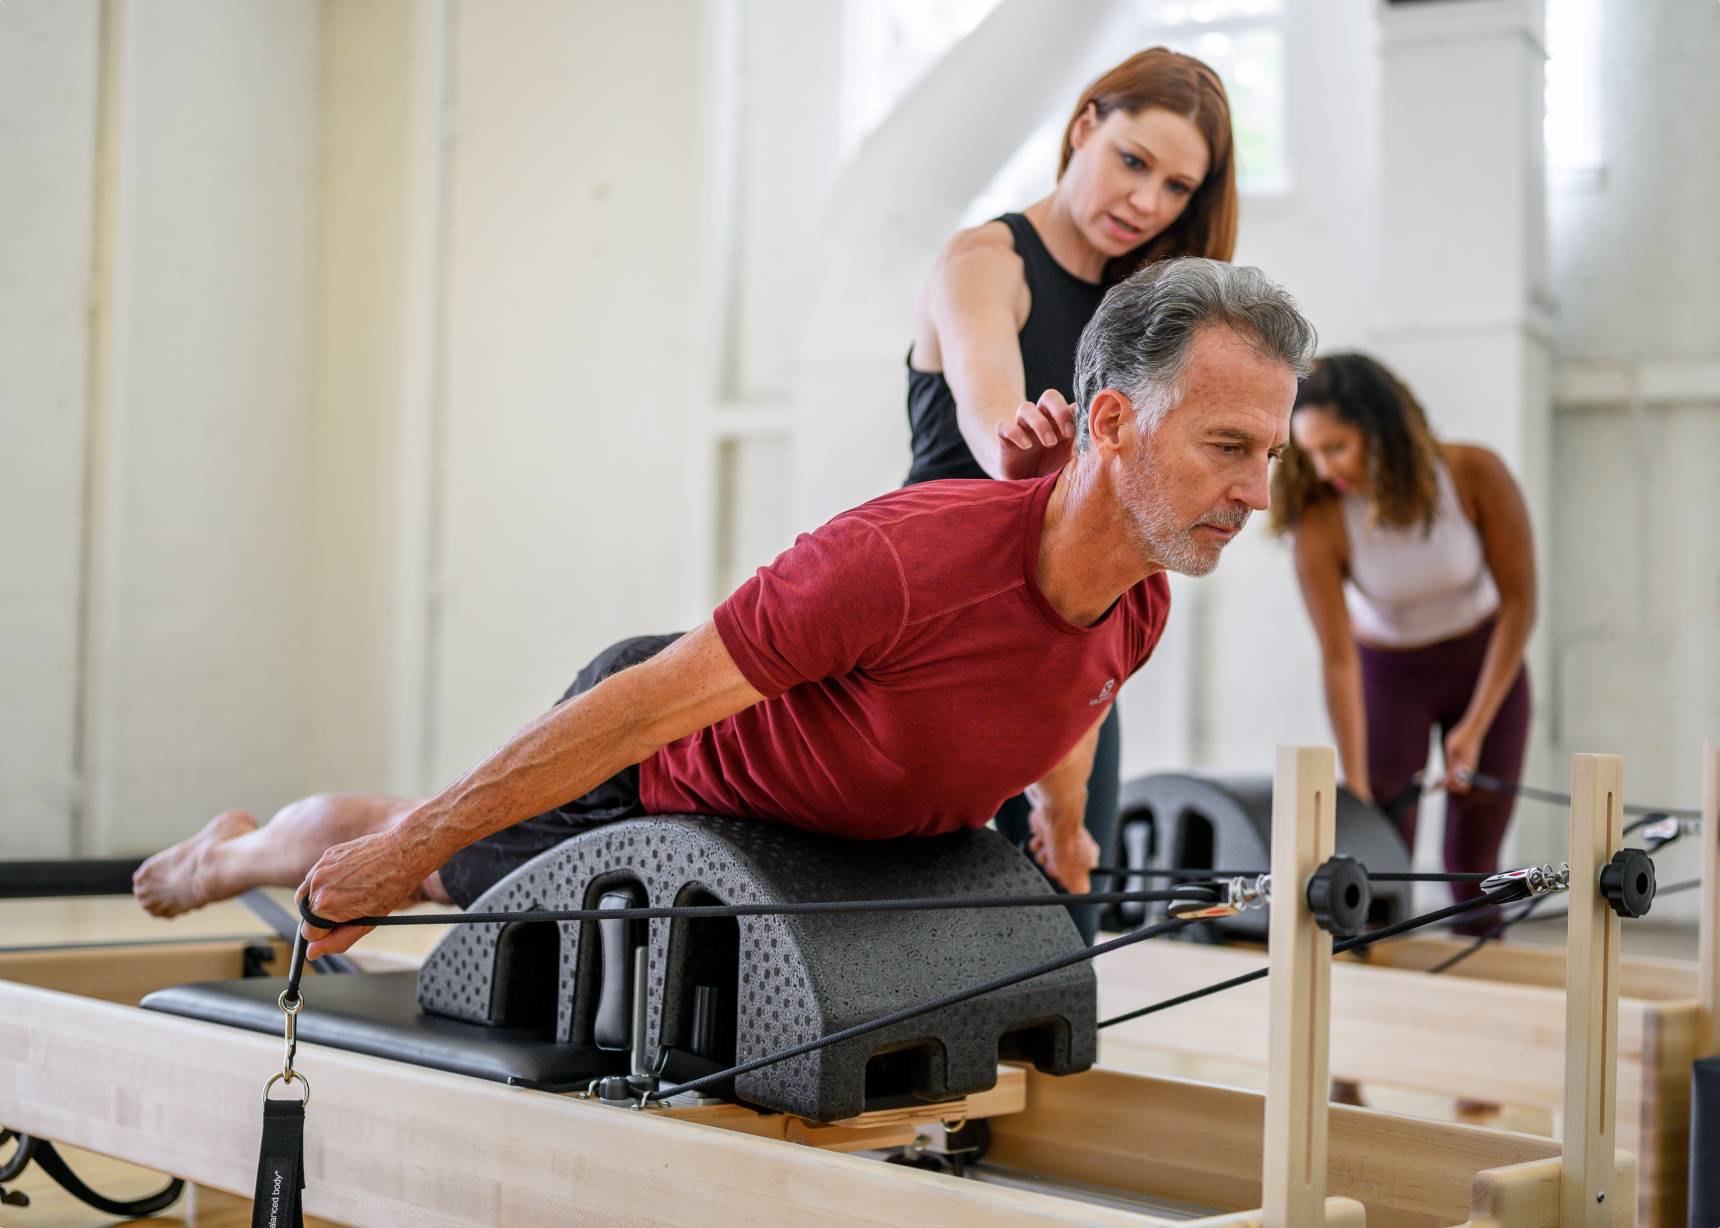 Pilates instructor assists client using the Pilates arc while extending limbs on a reformer